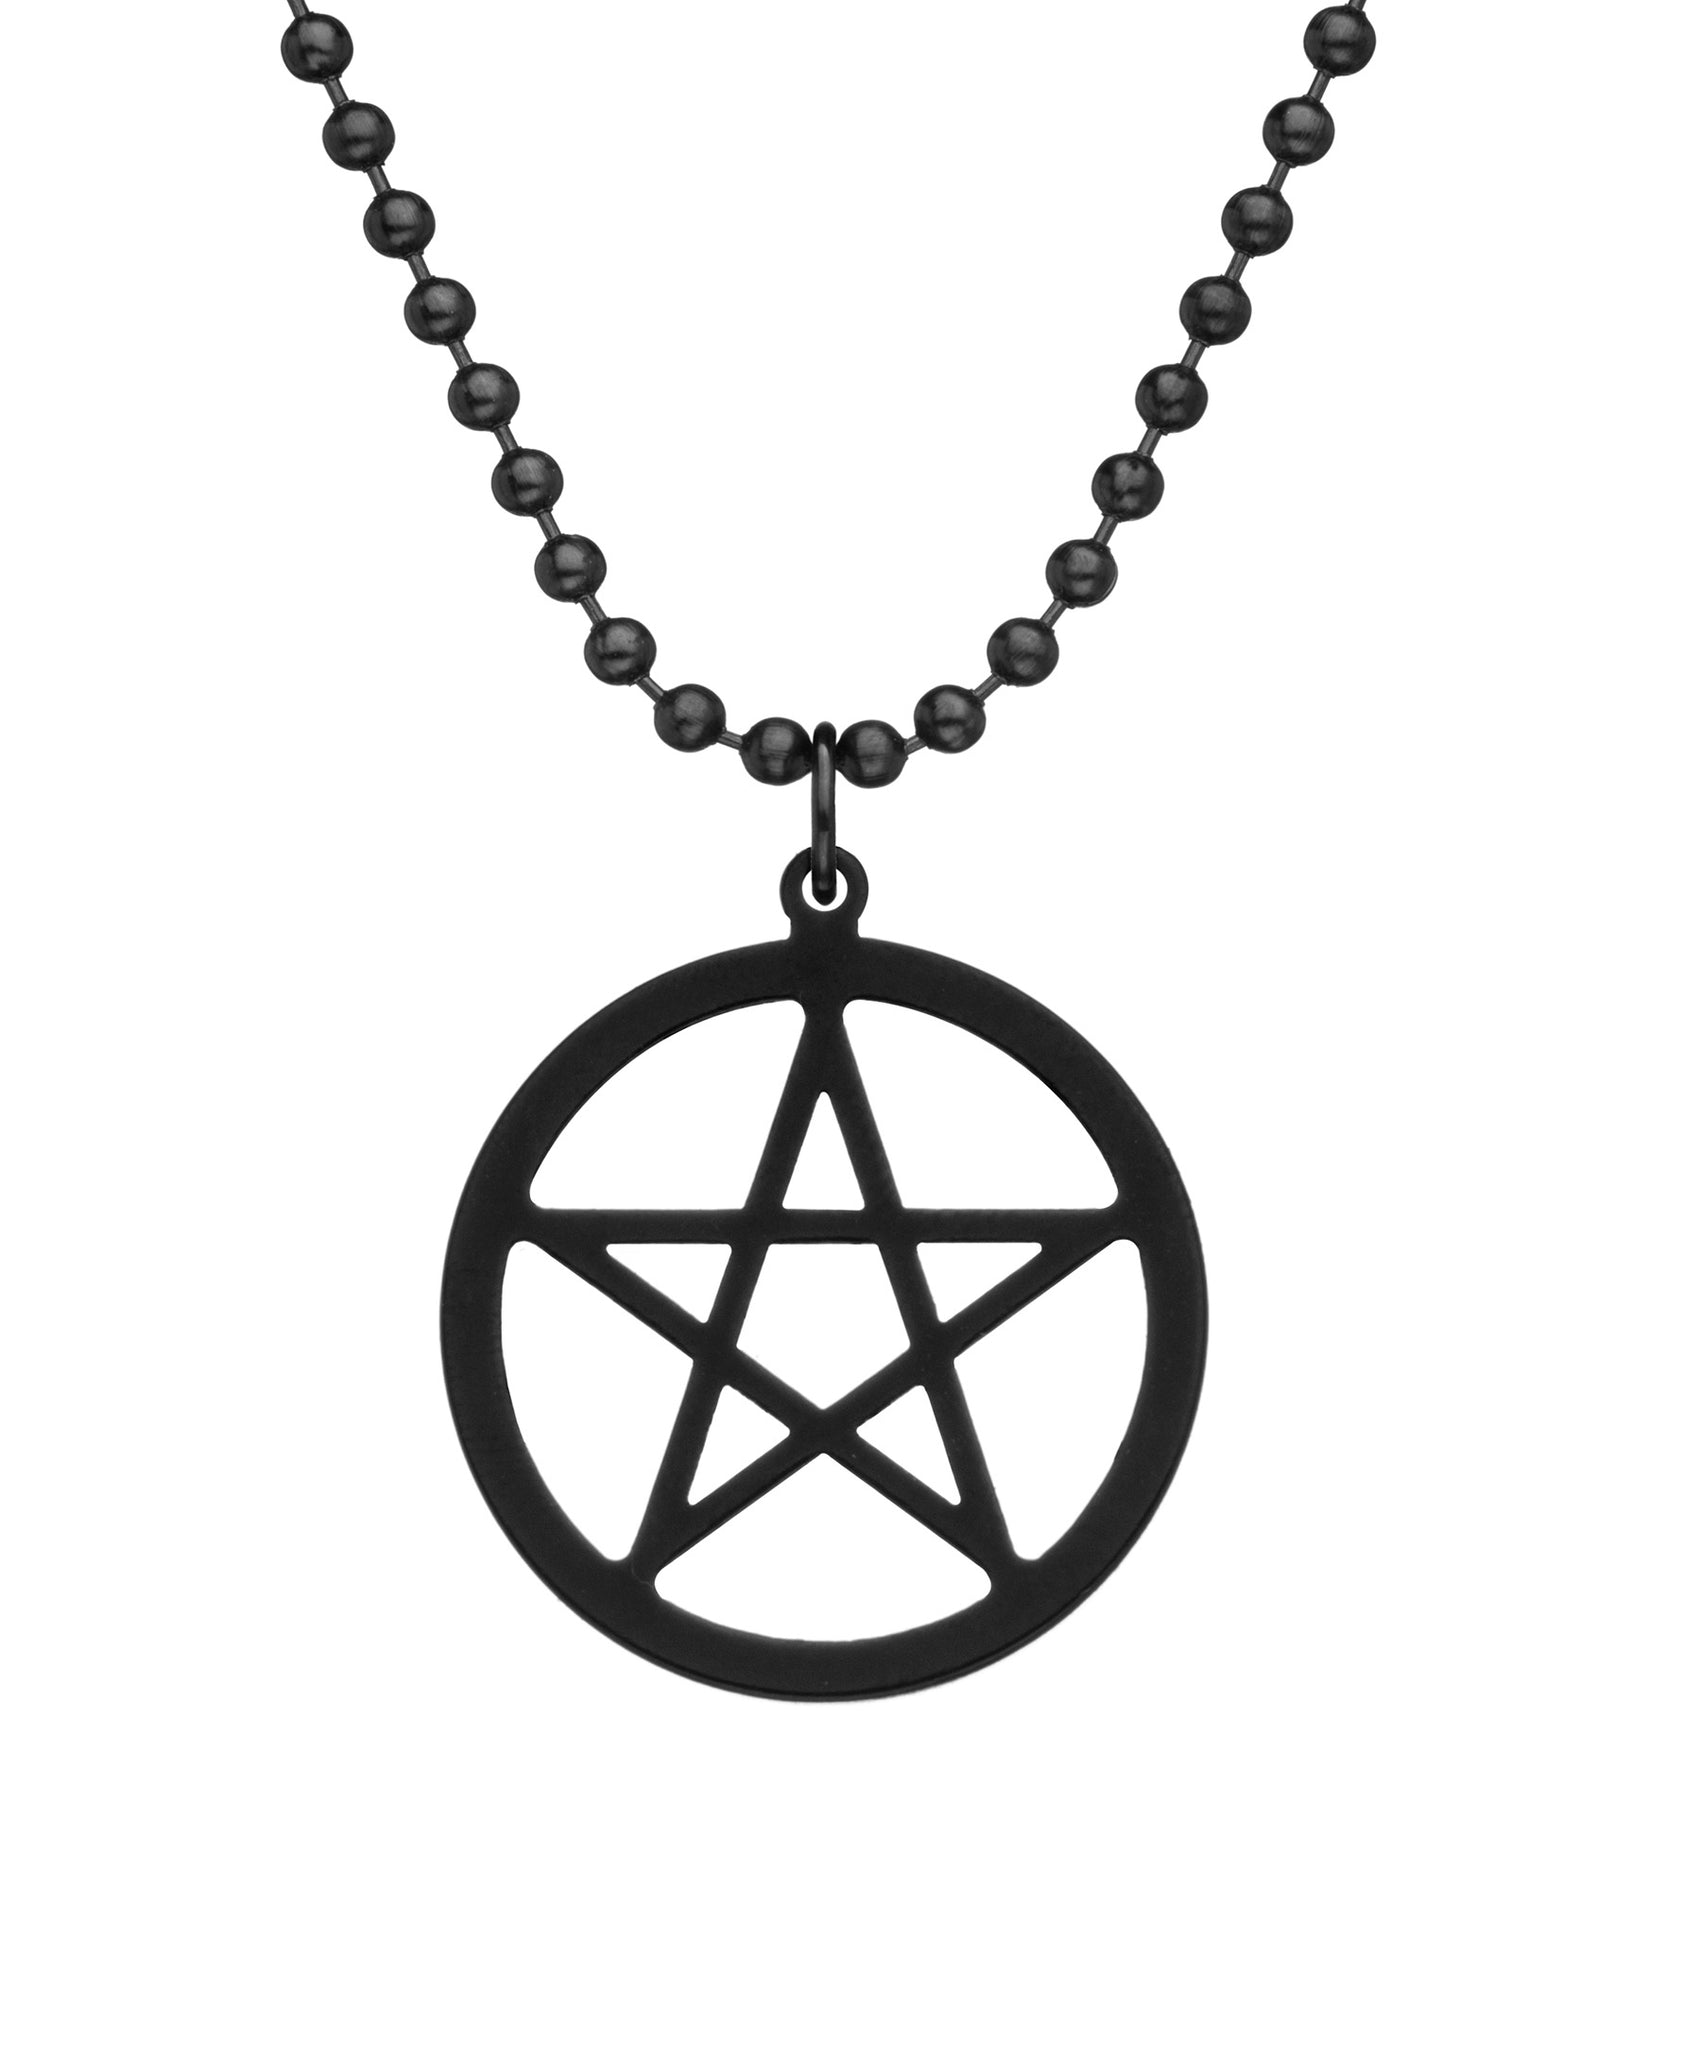 GI JEWELRY Military Issue Stainless Steel Pentacle Necklace - Black